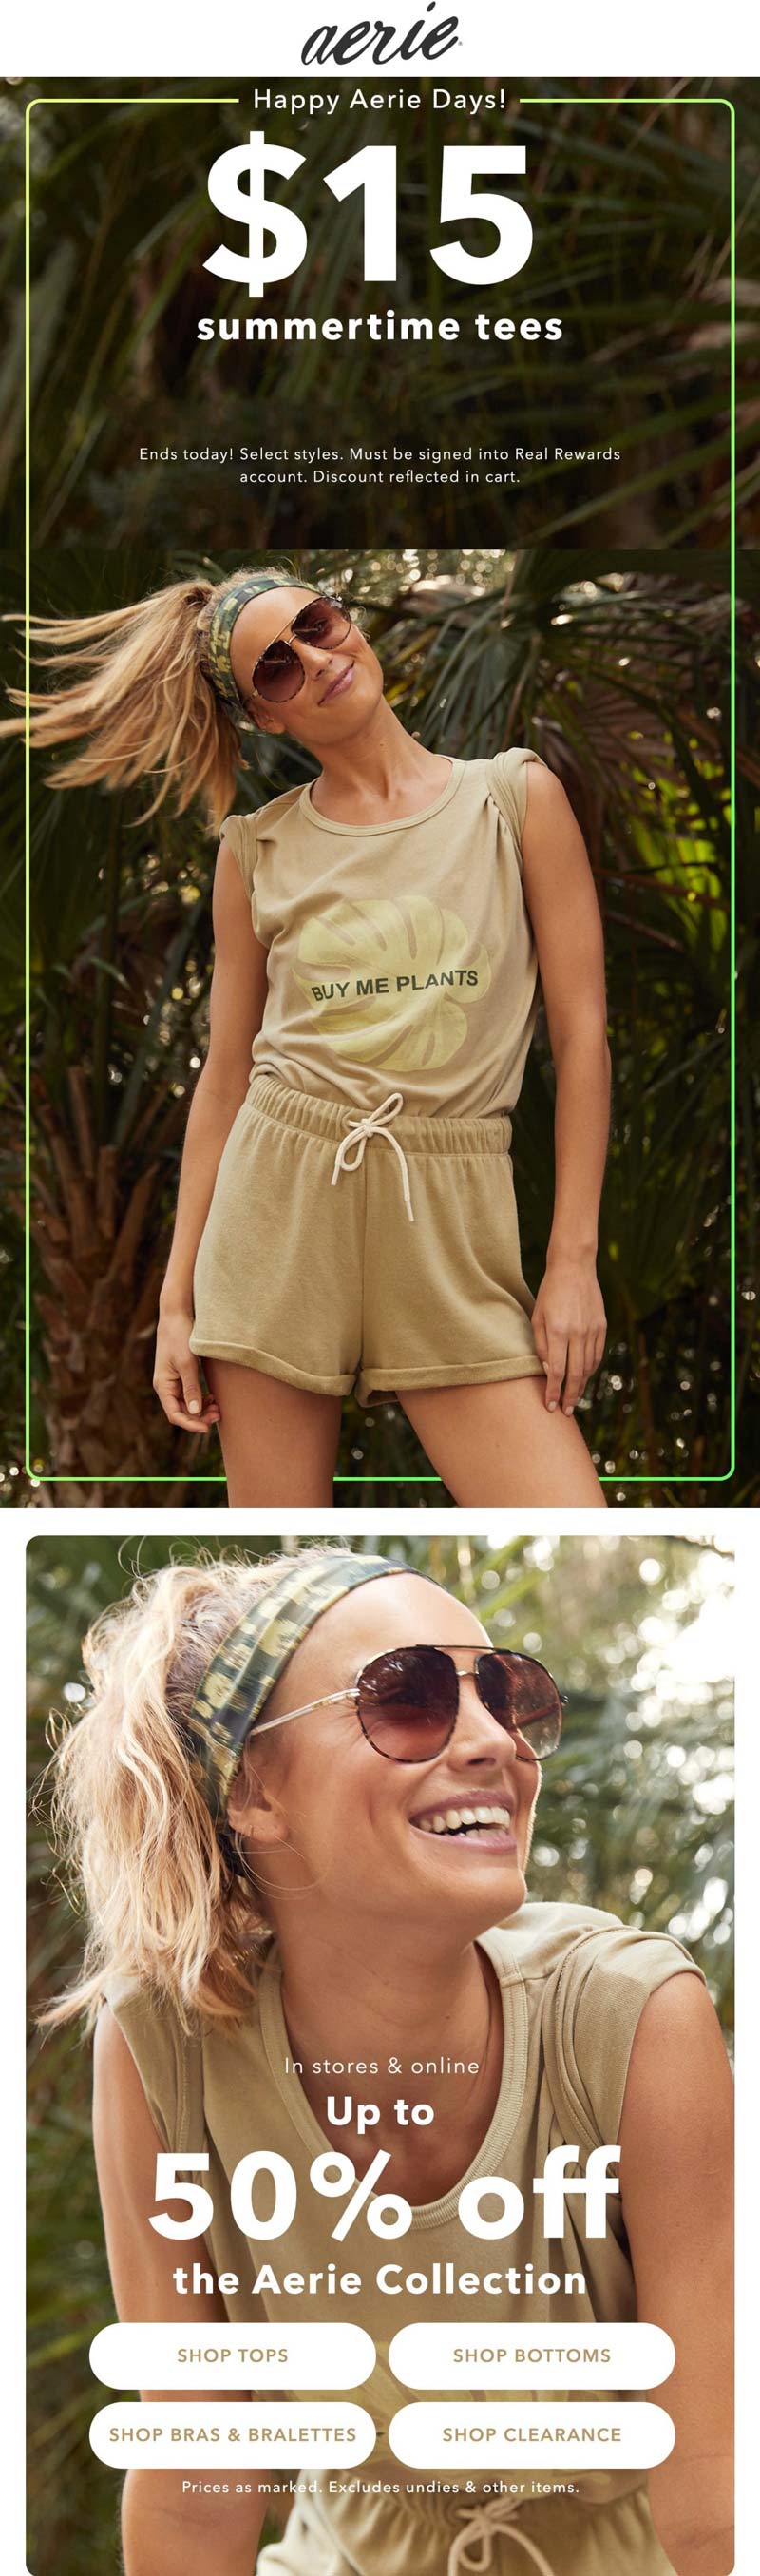 Aerie stores Coupon  $15 summertime tees today at Aerie #aerie 